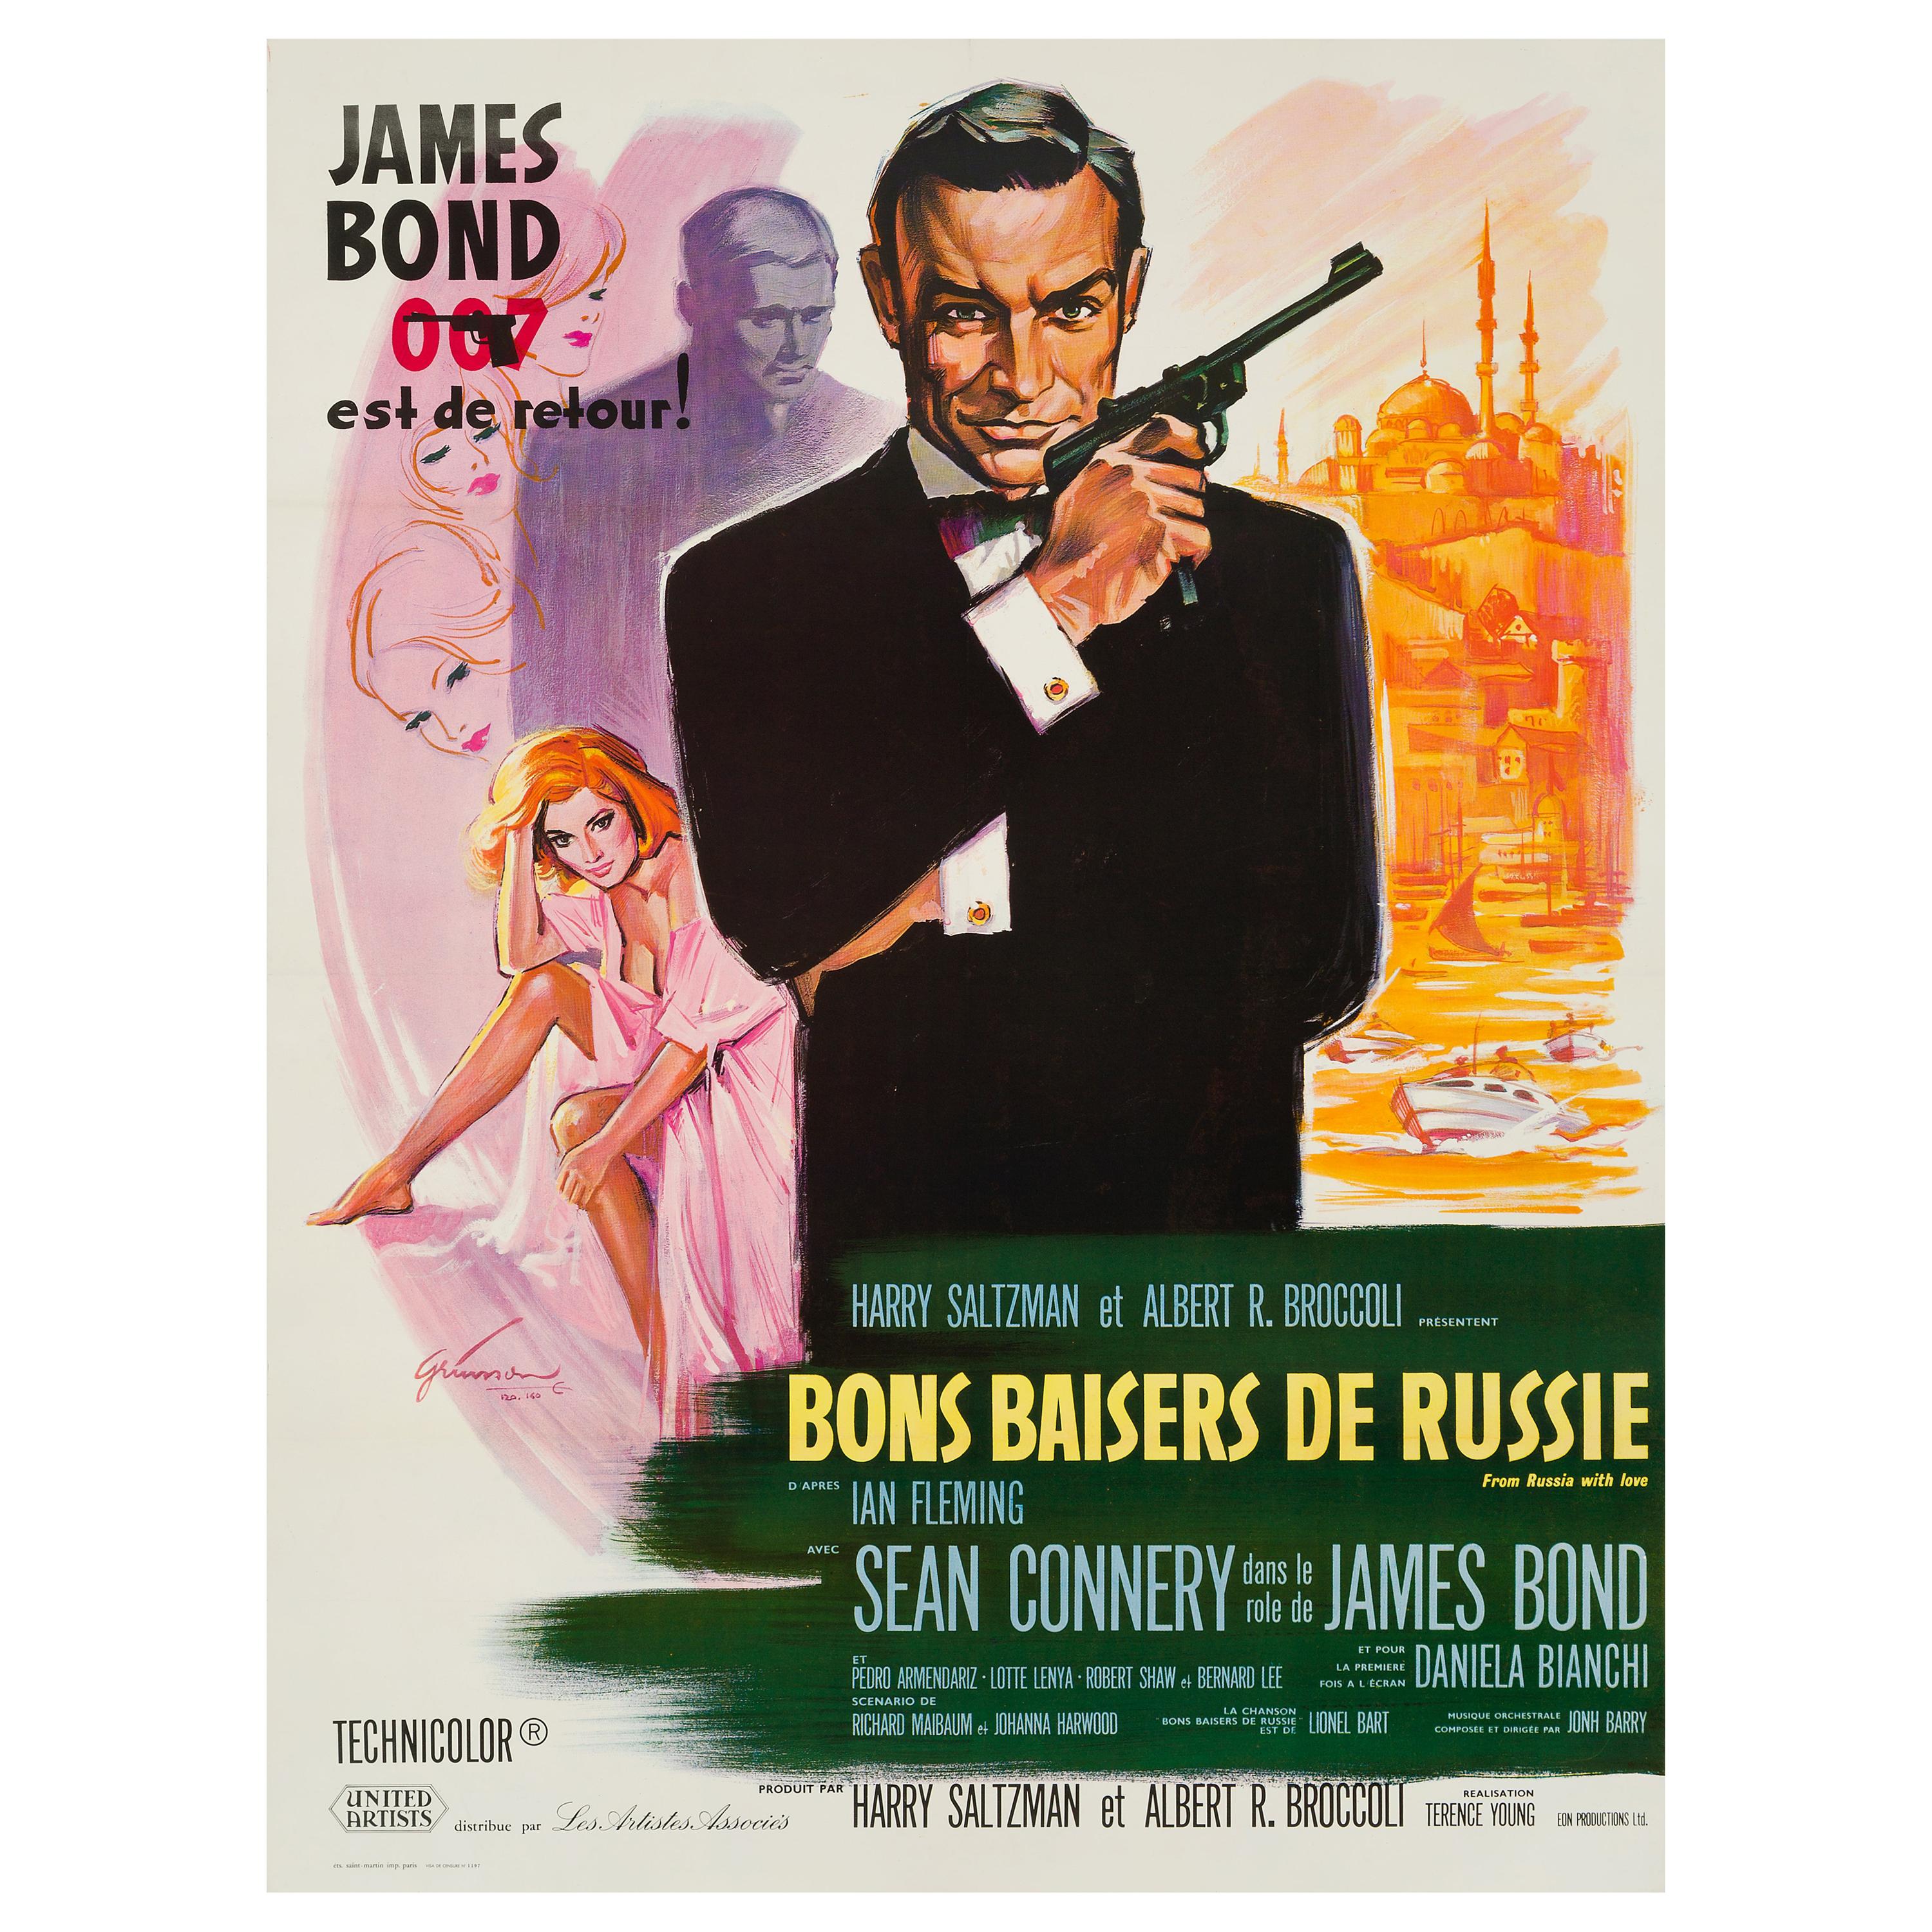 James Bond 'From Russia With Love' Vintage French Movie Poster by Grinsson, 1963